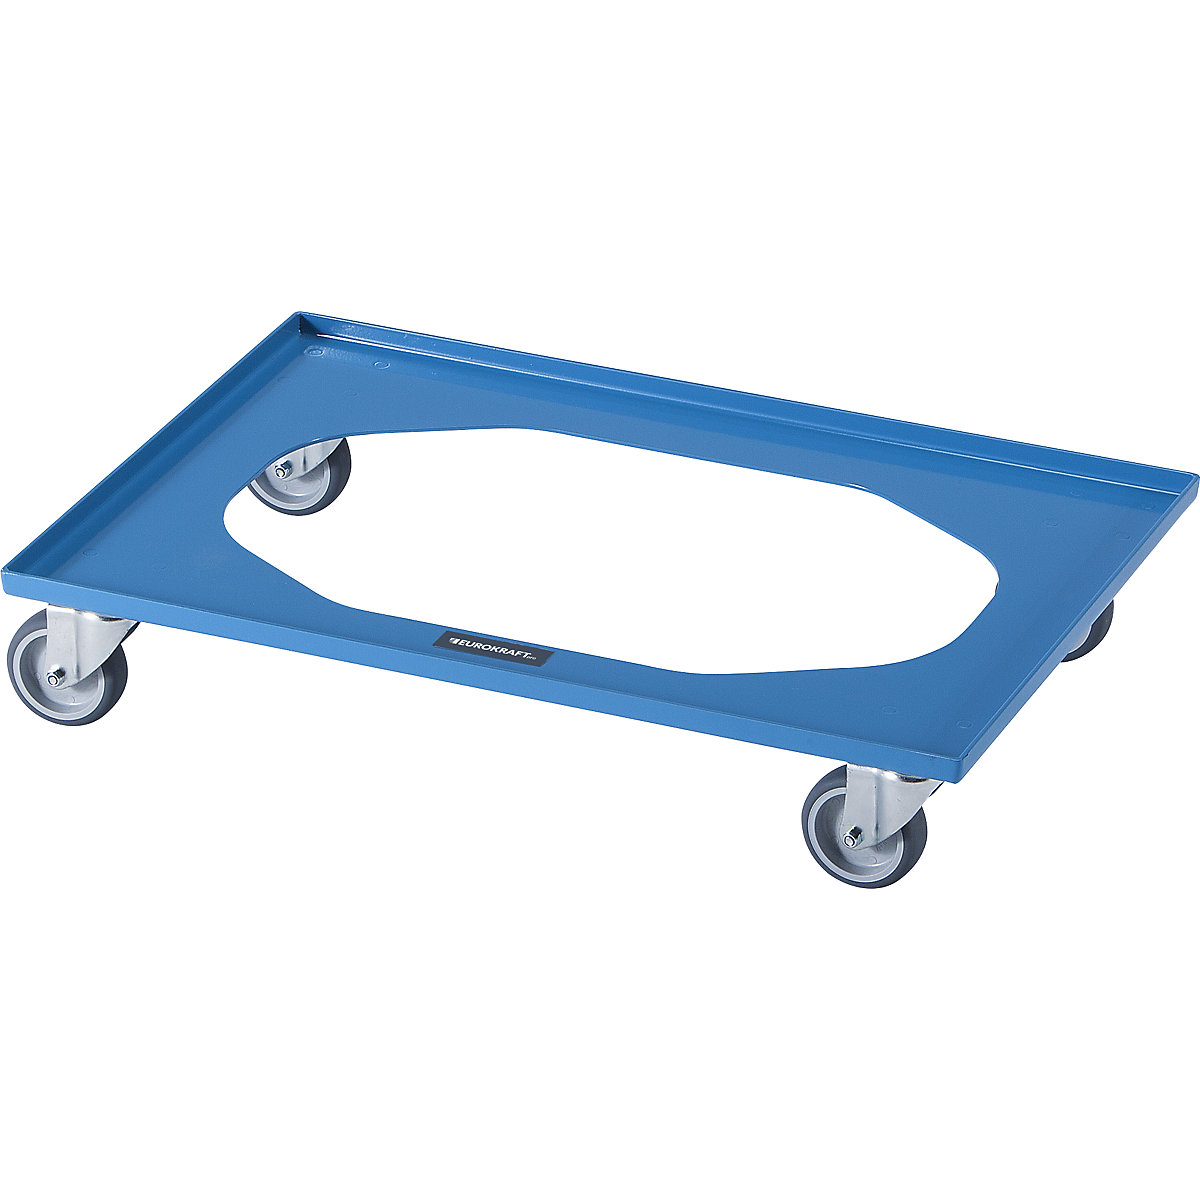 NEO transport dolly – eurokraft pro, for Euro formats 600 x 400 mm, max. load 250 kg, 5+ items-7